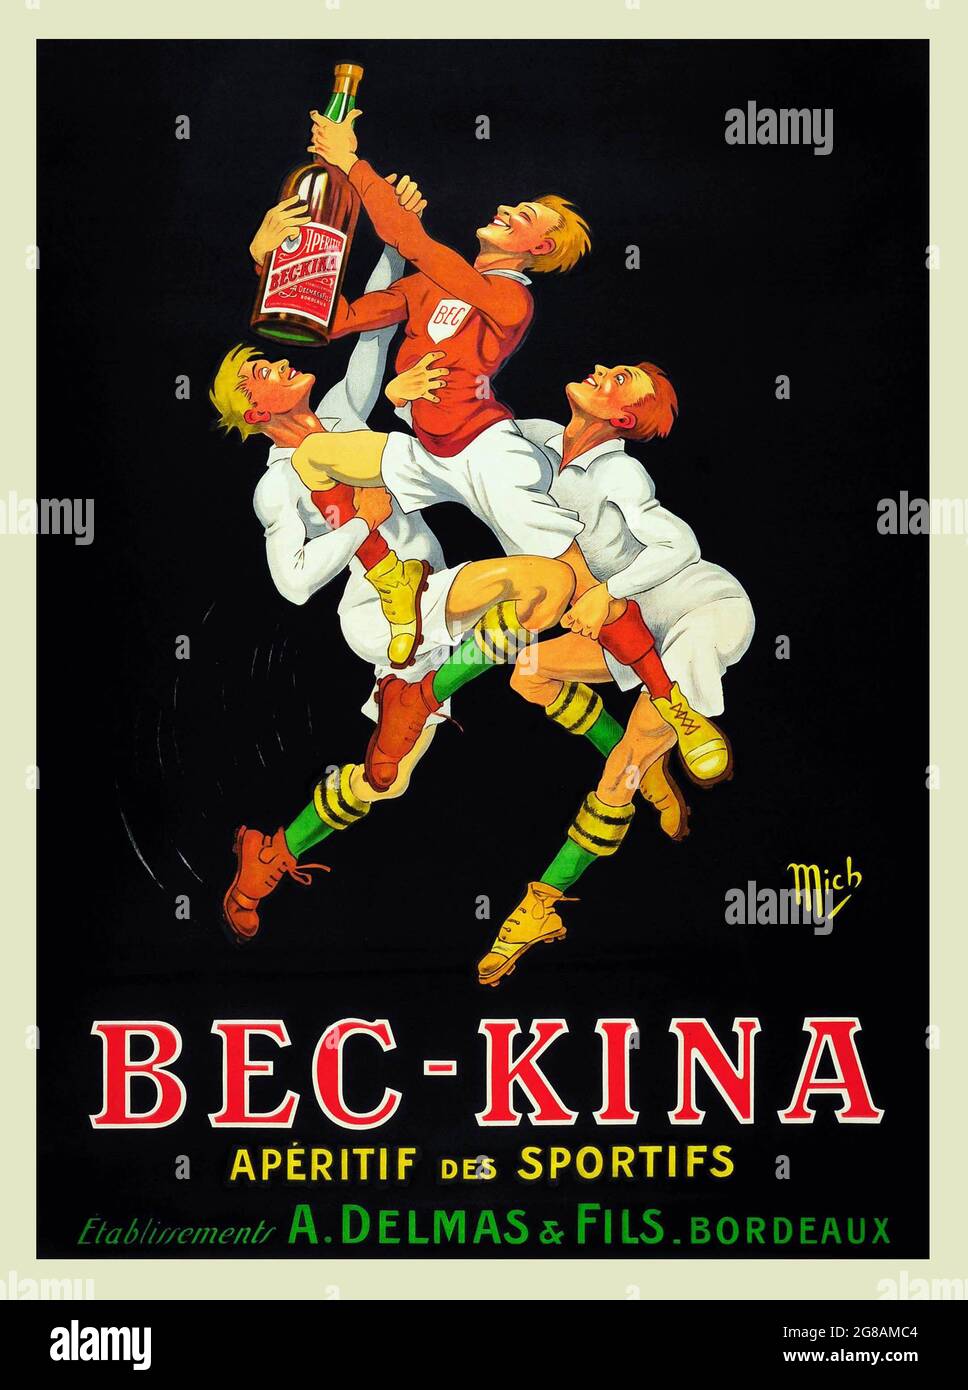 Bec-Kina French aperitif 1910. Advertisement for alcohol. Old times advertising feat. rugby players reaching for the bottle. Aperitif des Sportifs. Stock Photo